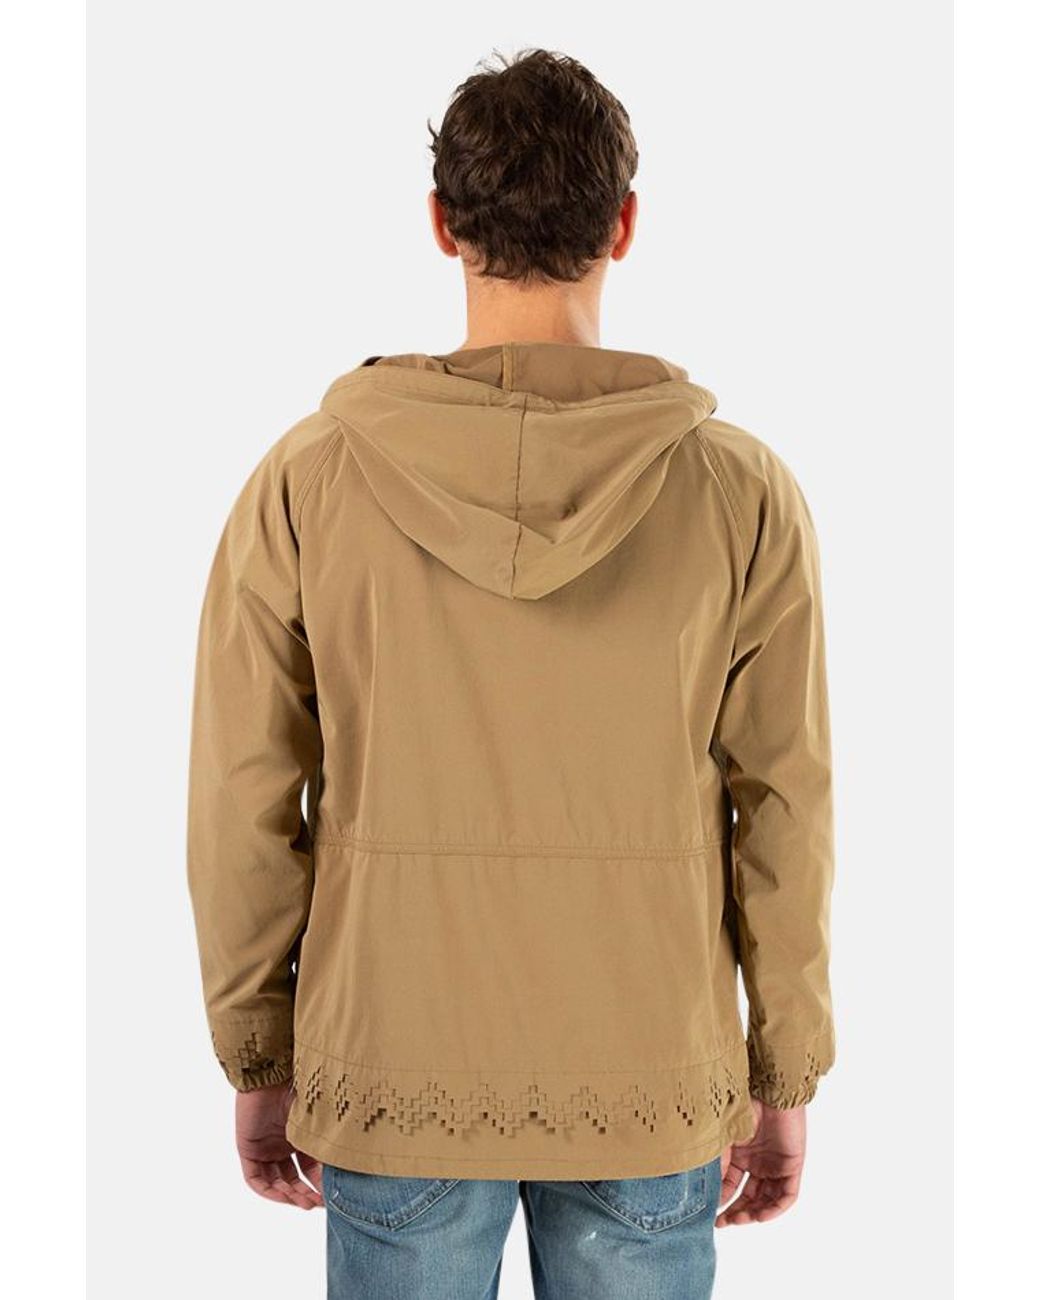 Remi Relief Synthetic Nylon Anorak Jacket in Beige (Natural) for 